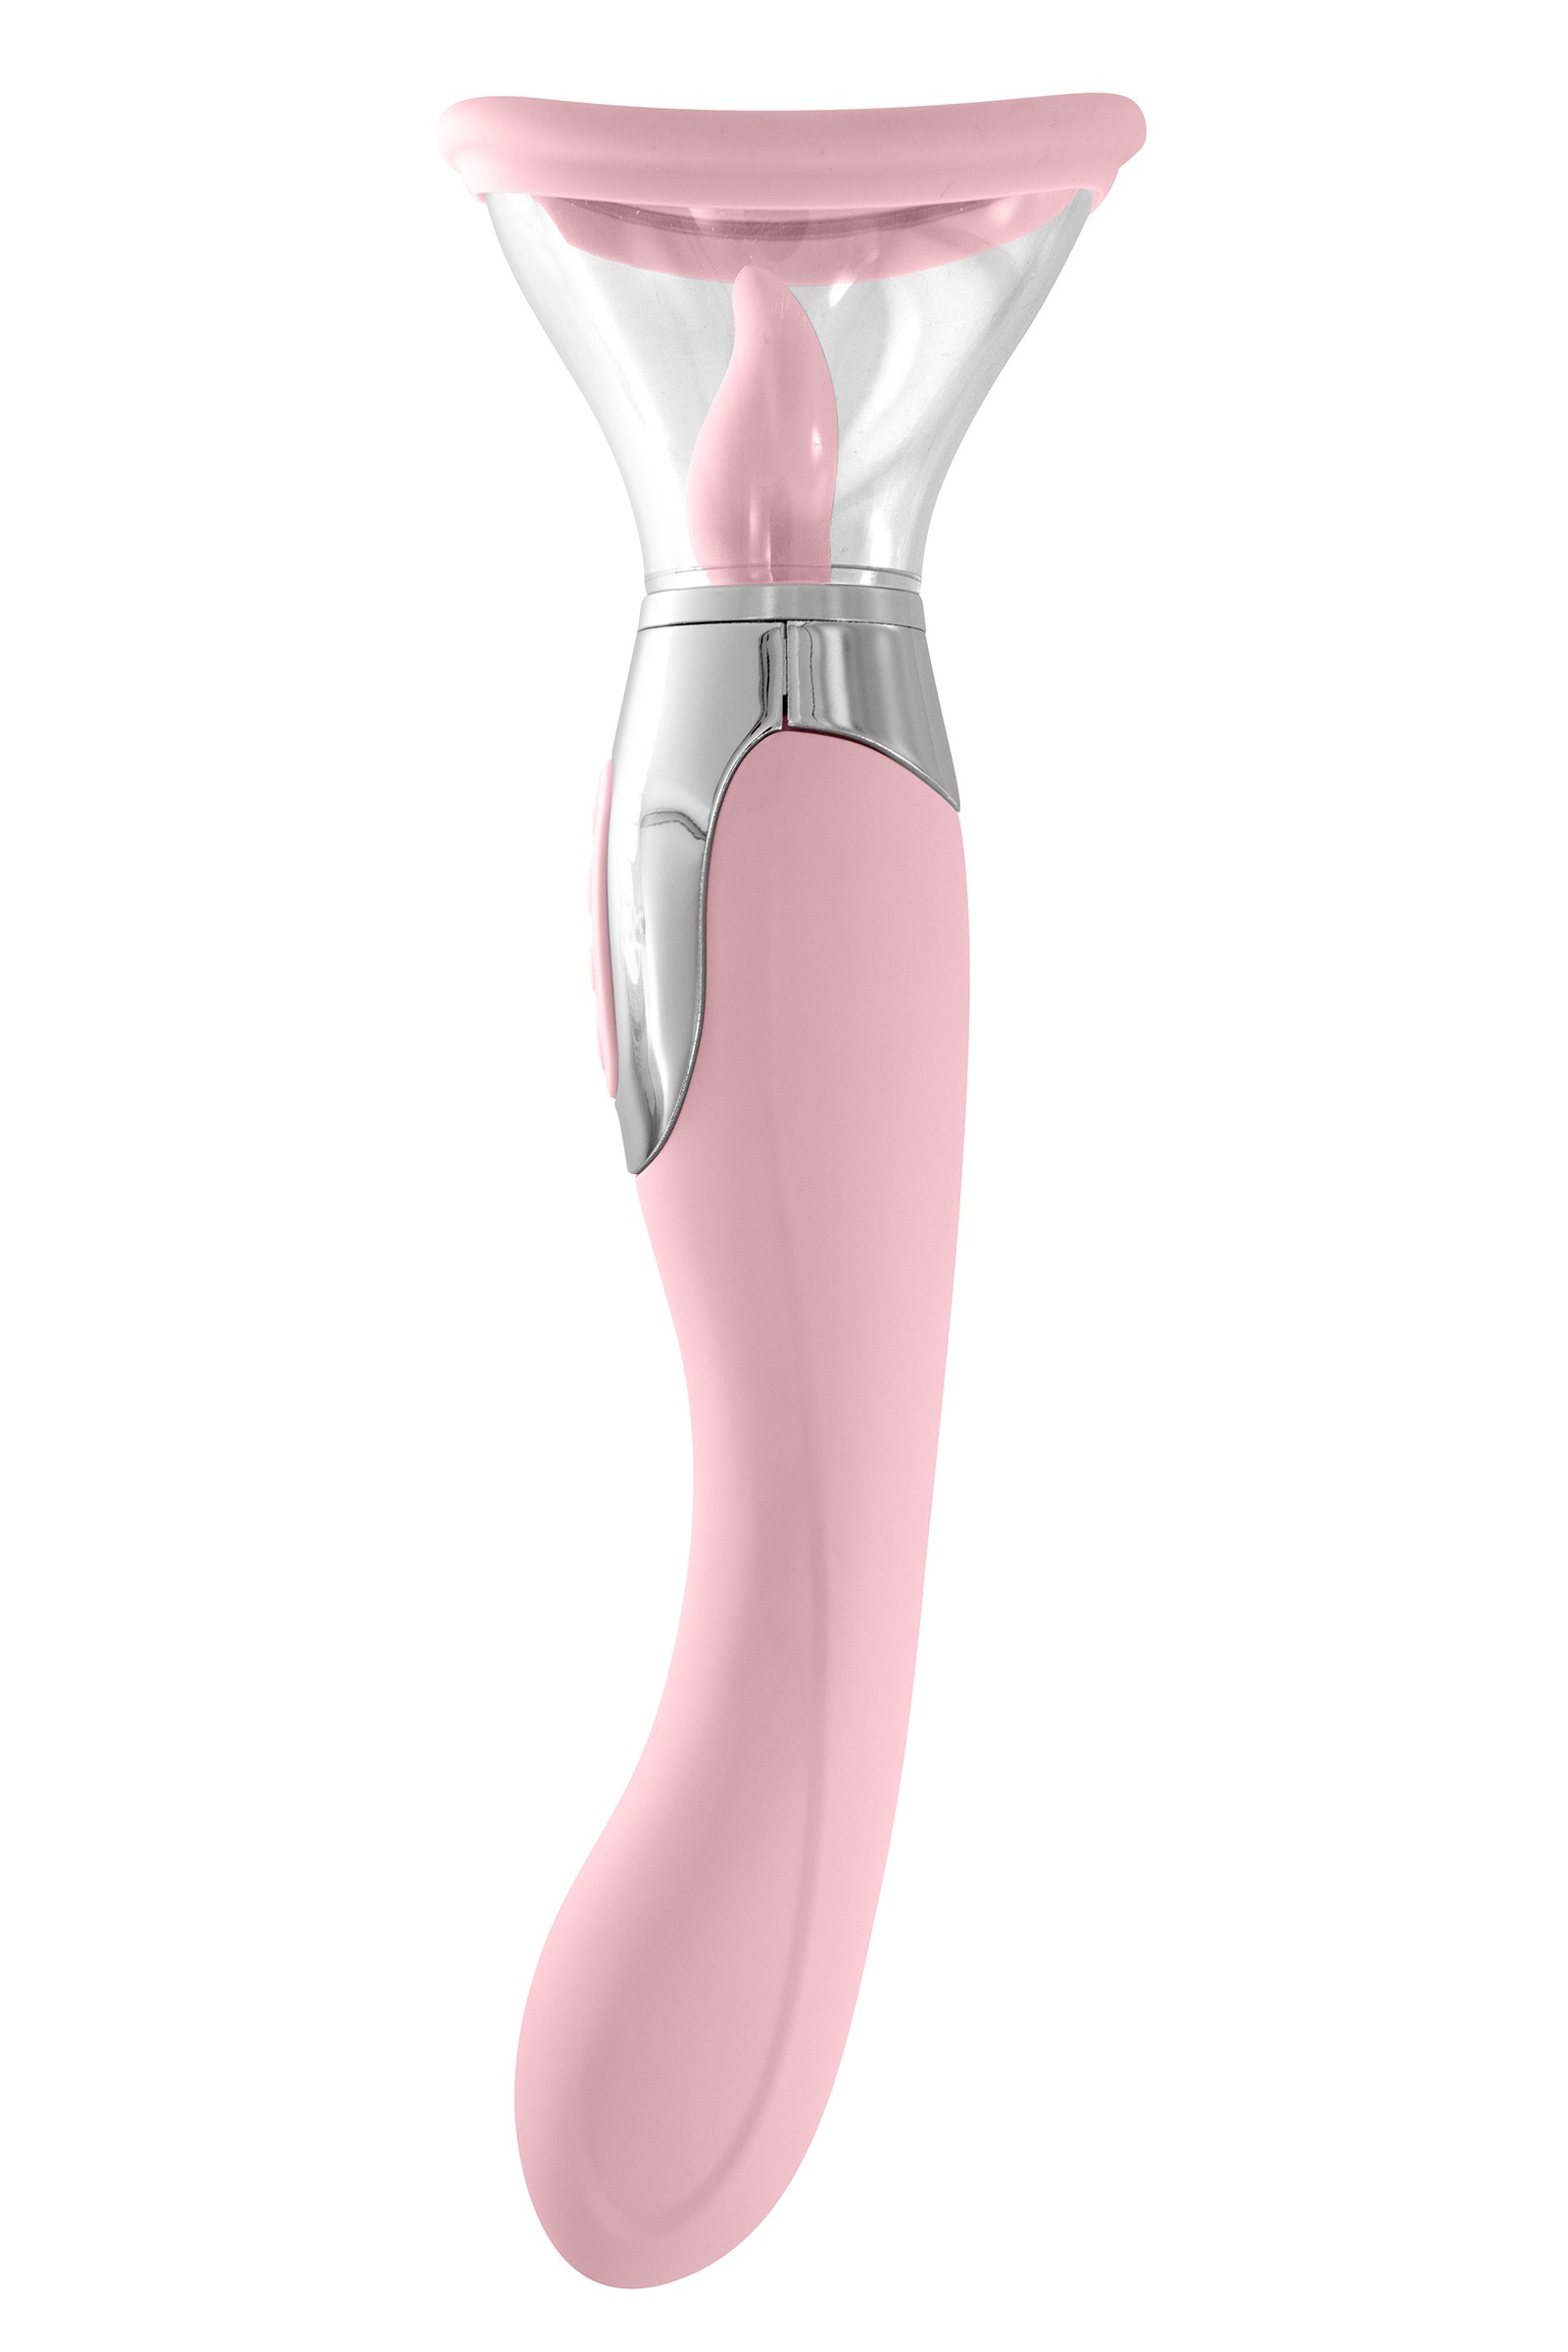 Unreadable Properly harvest Yoba 4-in-1 Harmony Pink Vibrator at 139,90 € in your favorite online  sexshop